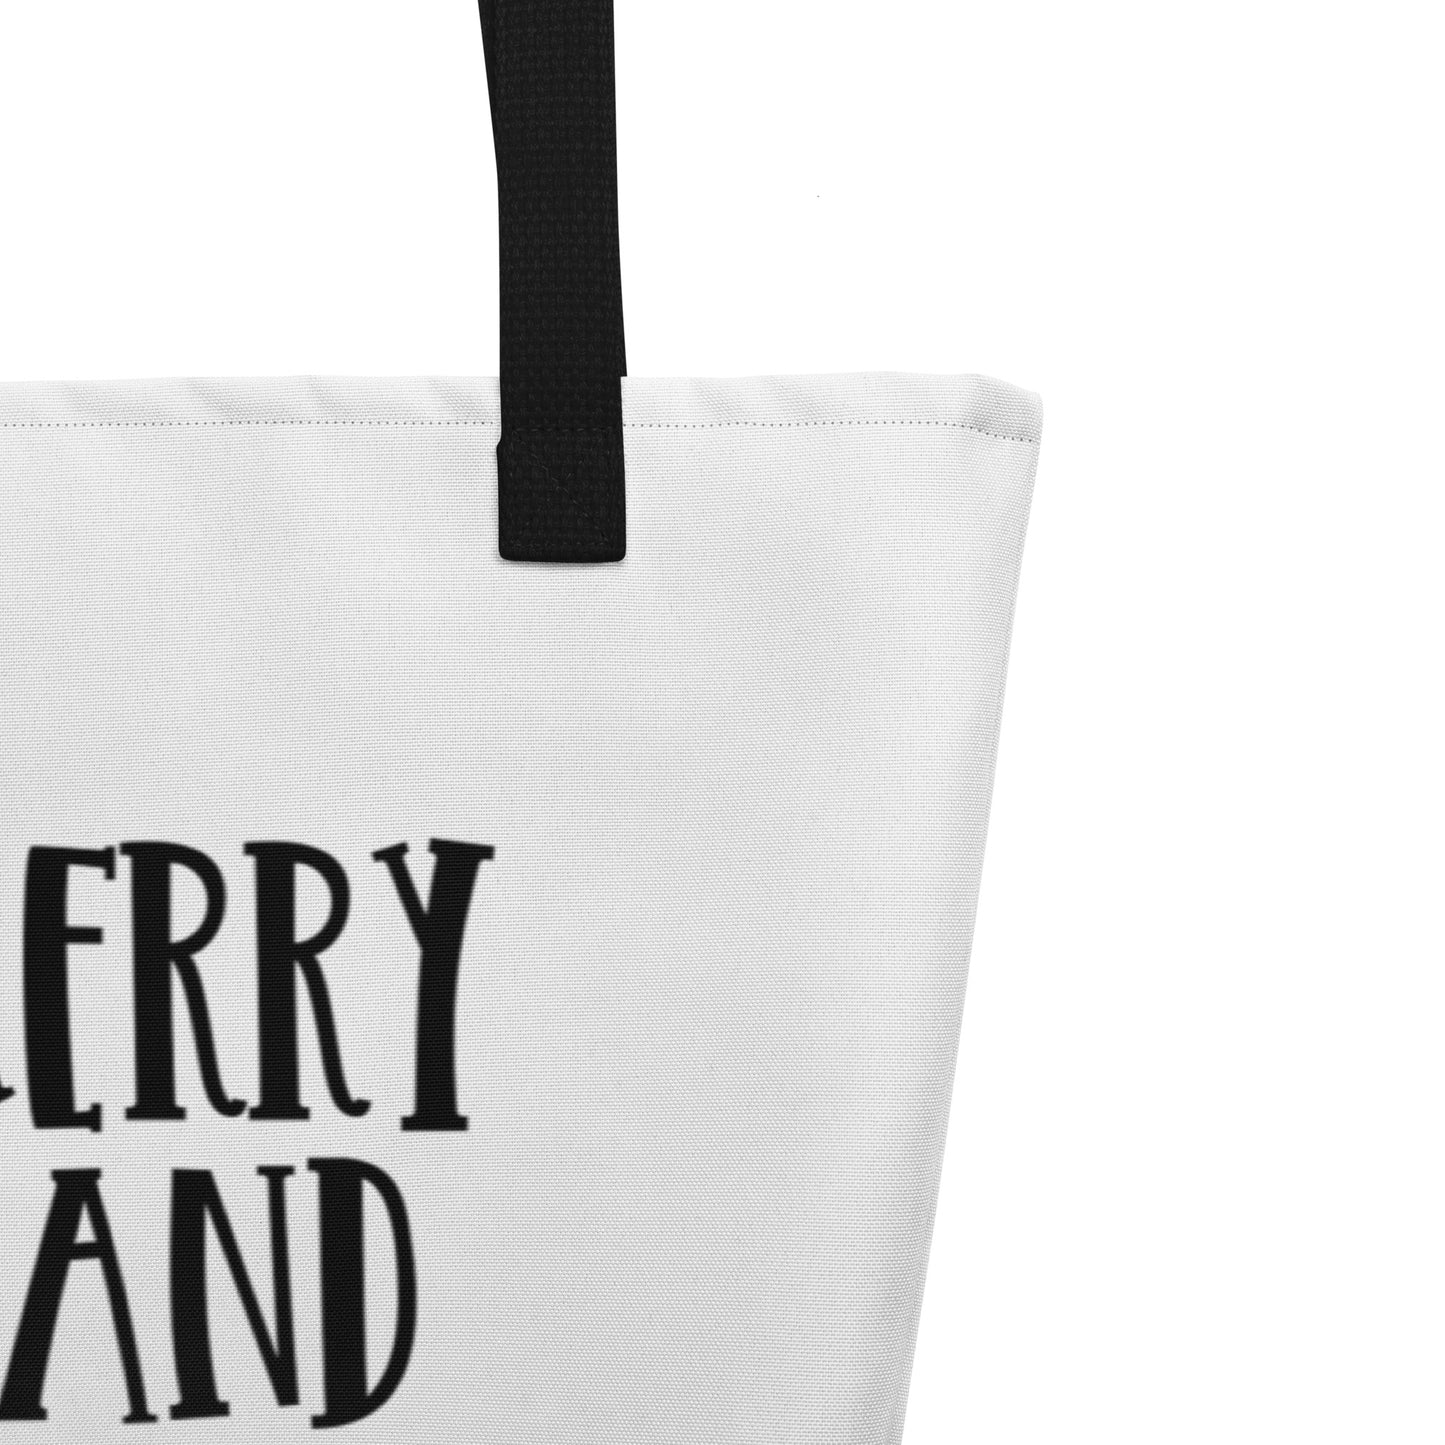 Merry and Bright All-Over Print Large Tote Bag